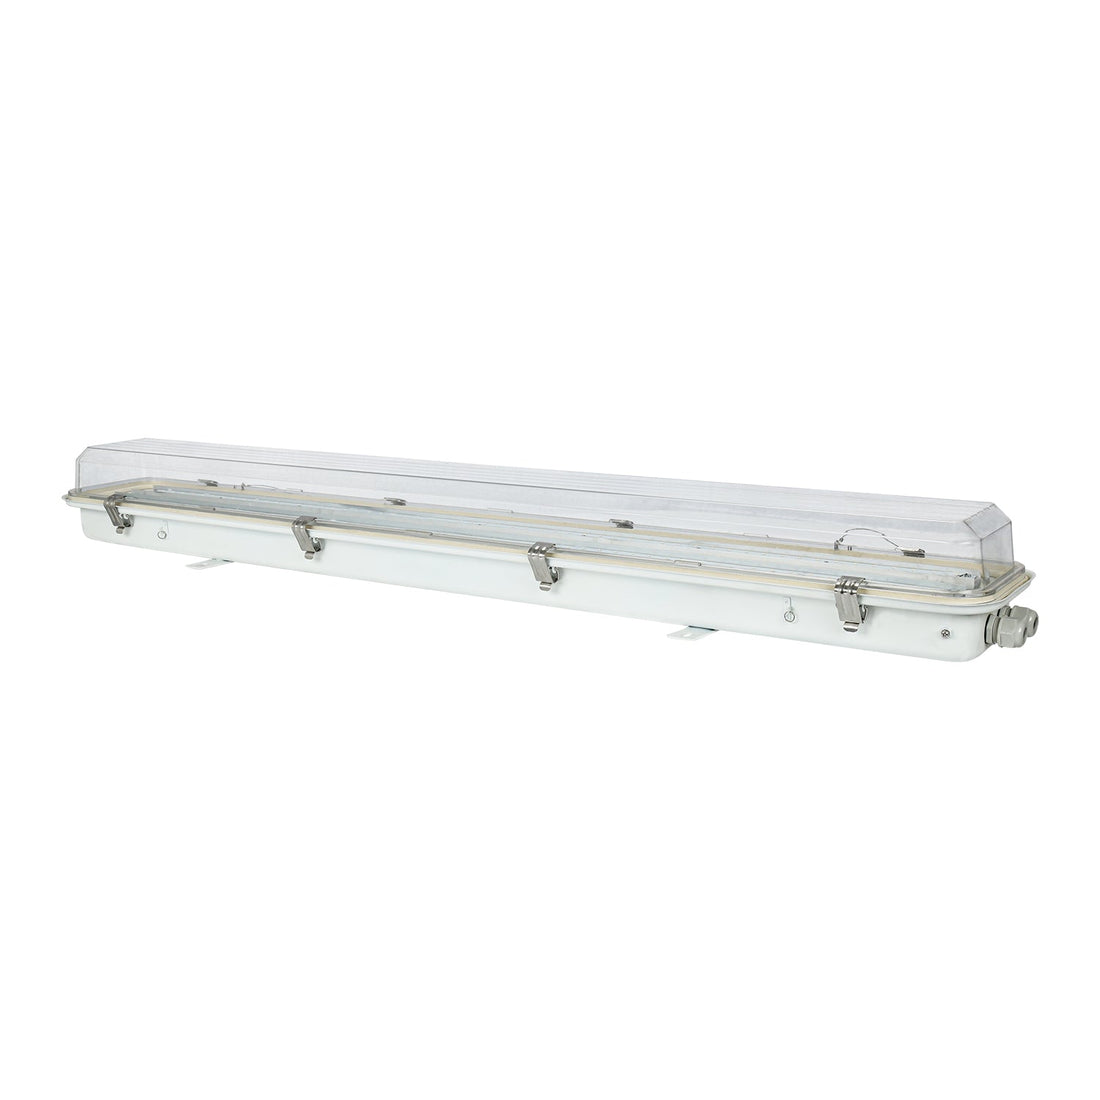 R Series 40W Dimmable LED Explosion Proof Vapor Proof Light: Compact and Powerful Lighting Solution for Hazardous Locations with 5600LM and IP66 Protection